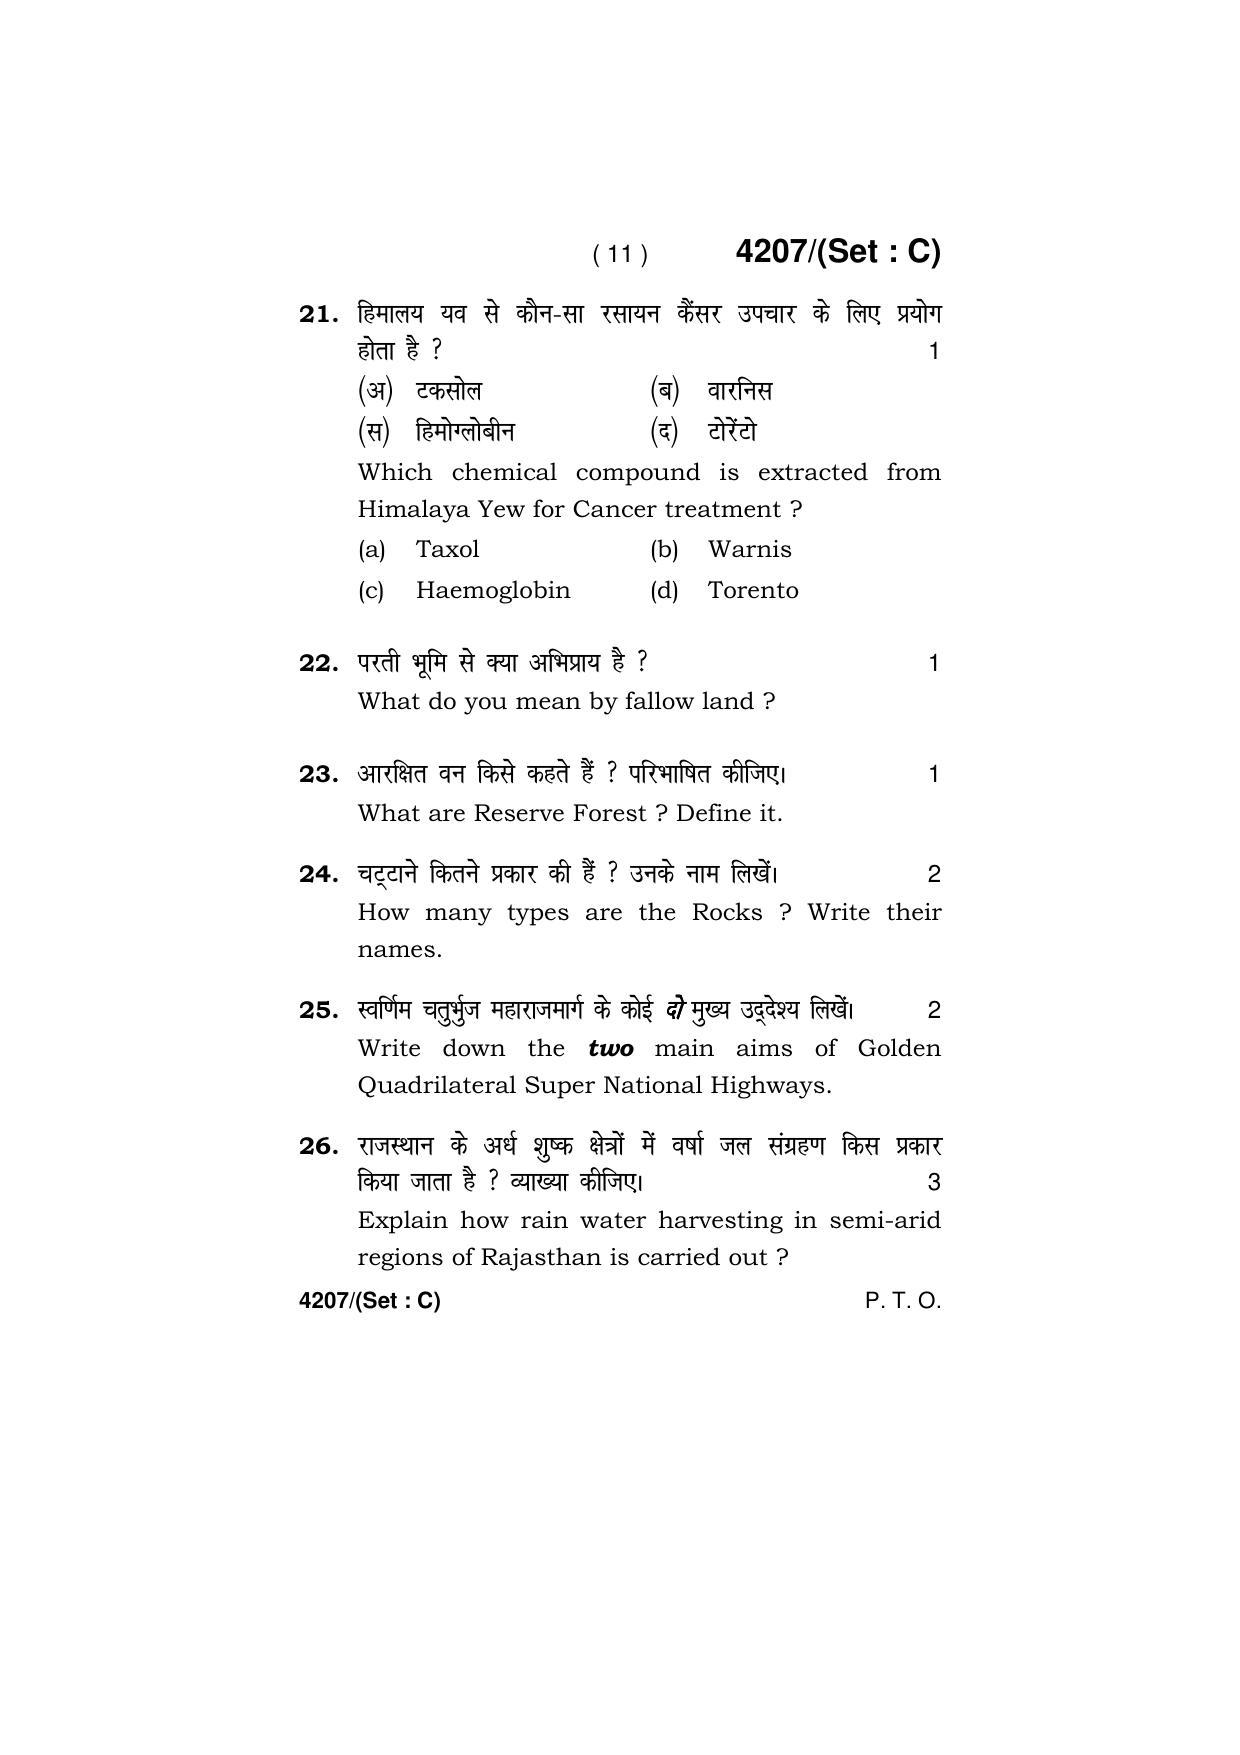 Haryana Board HBSE Class 10 Social Science (All Set) 2019 Question Paper - Page 41